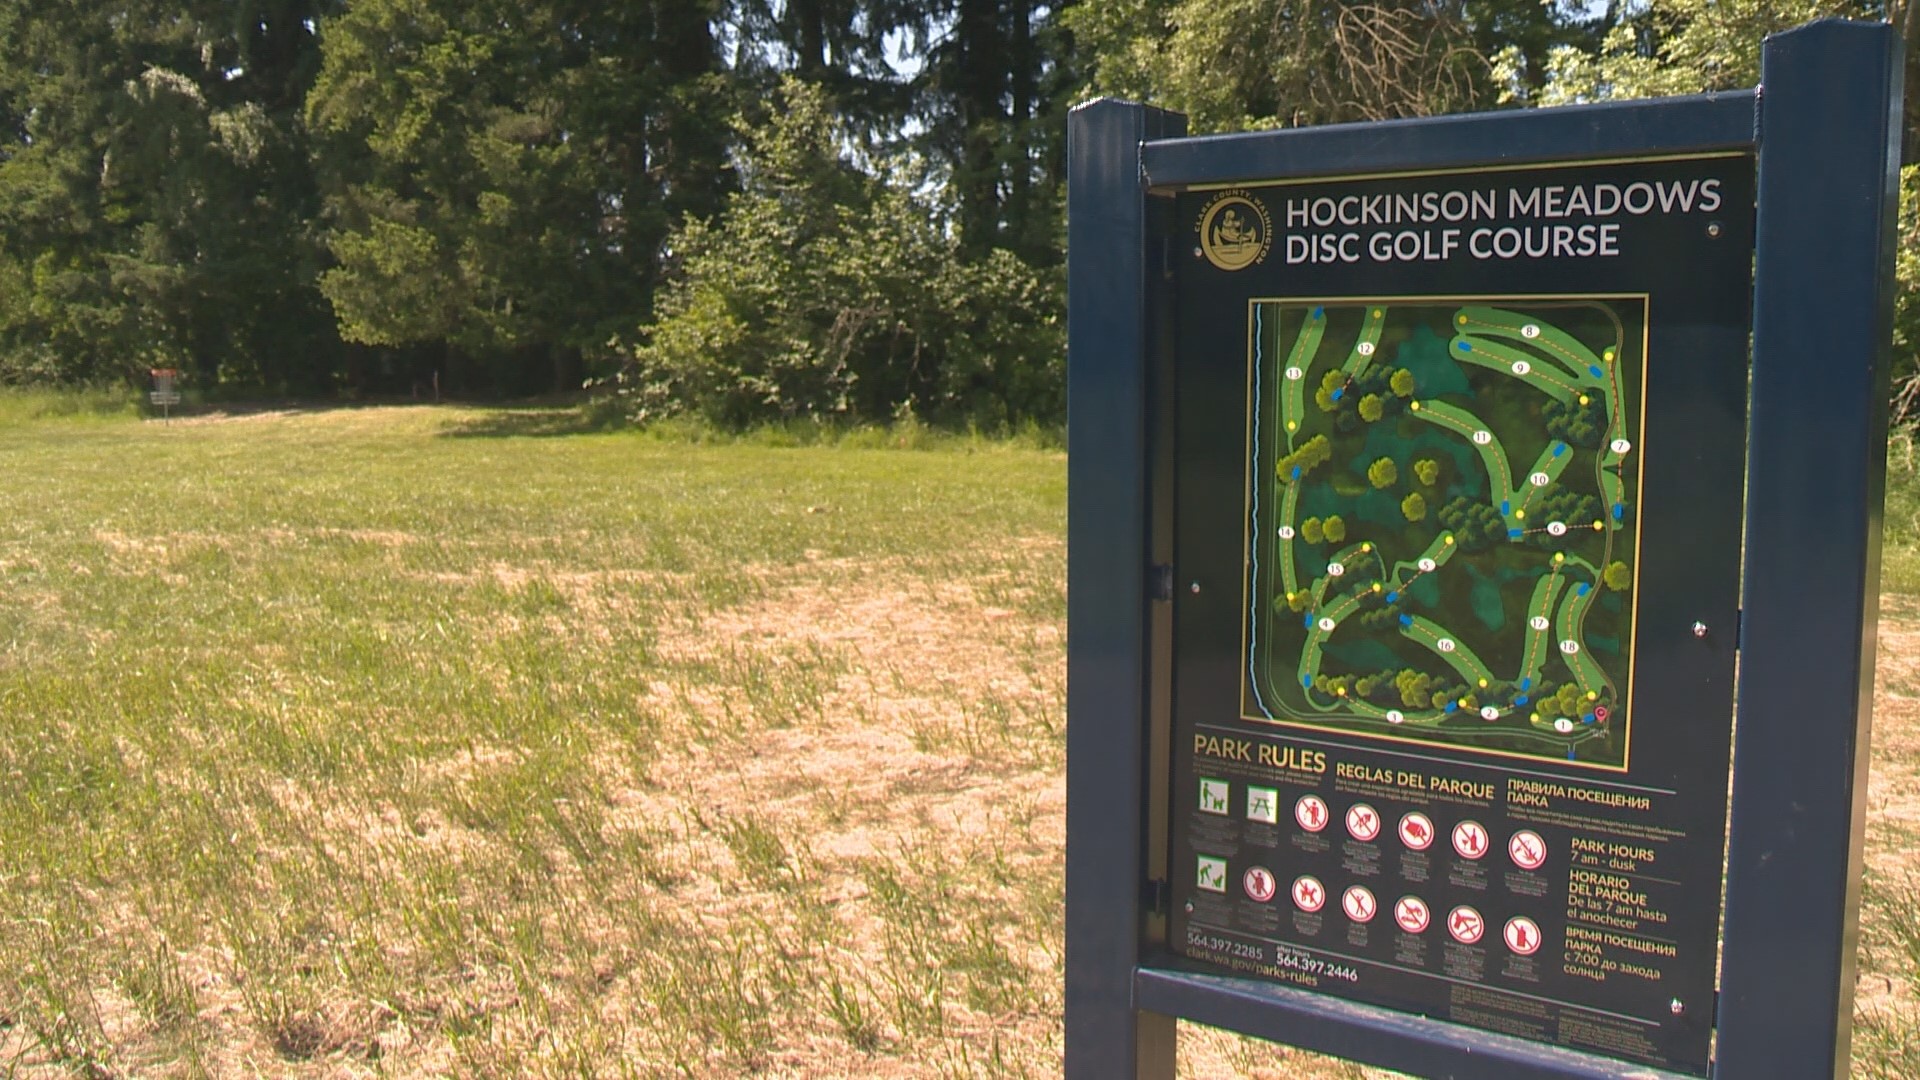 Hockinson Meadows Community Park is home to a new 18-hole disc golf course. KGW Sunrise reporter Devon Haskins and a pair of pros took their discs for a spin.